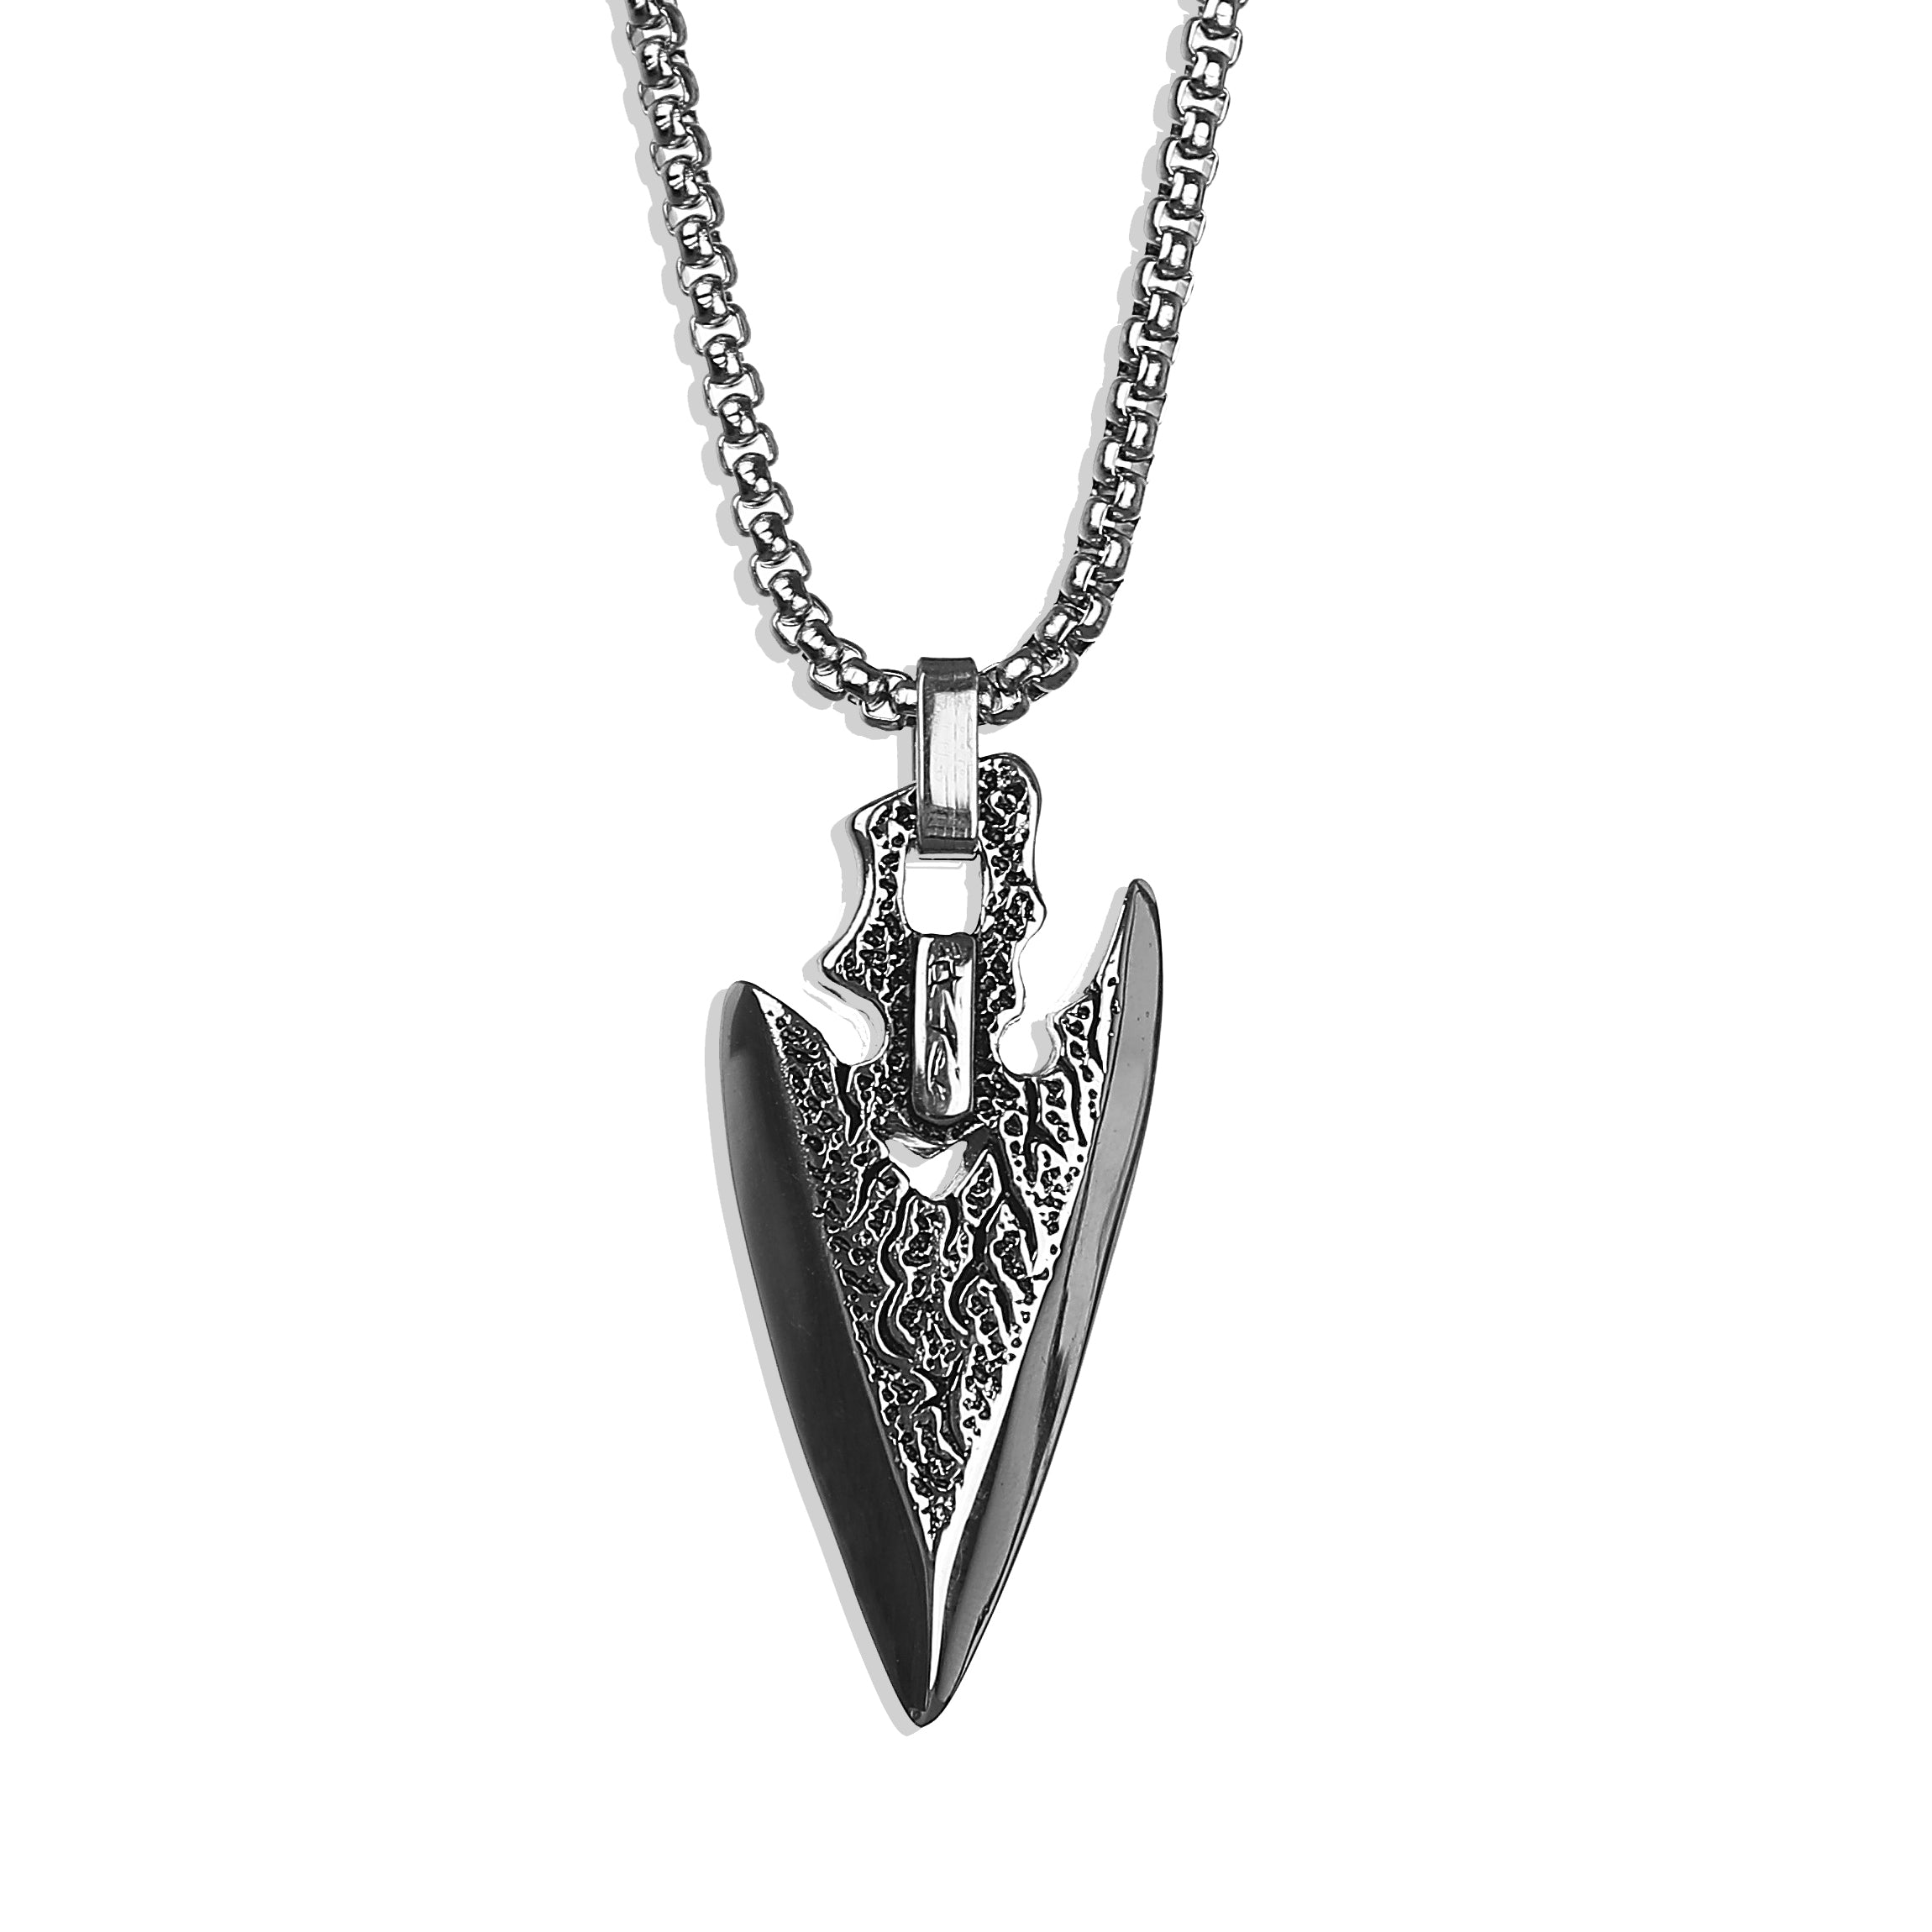 Rugged Arrowhead Necklace - Silver | MODERN OUT | Reviews on Judge.me